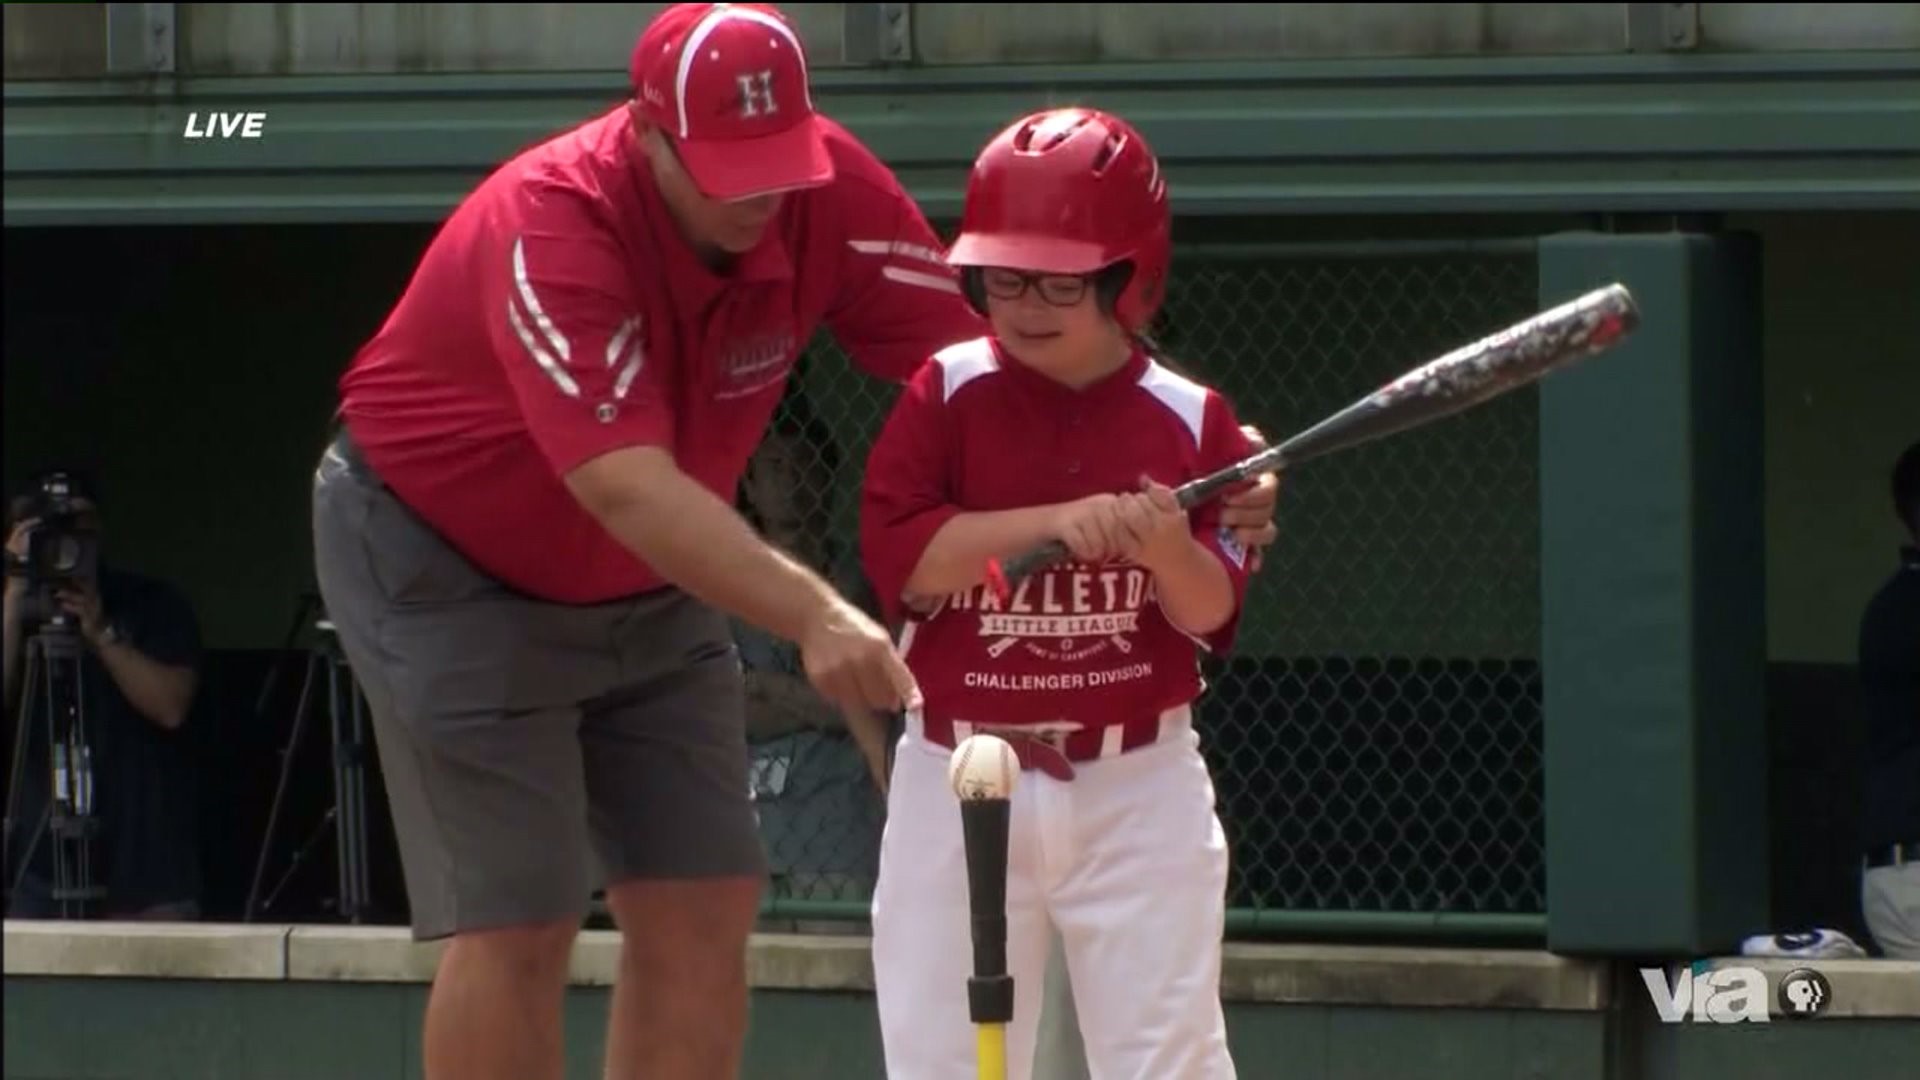 Hazleton Takes on Indiana in Little League Challenger Game